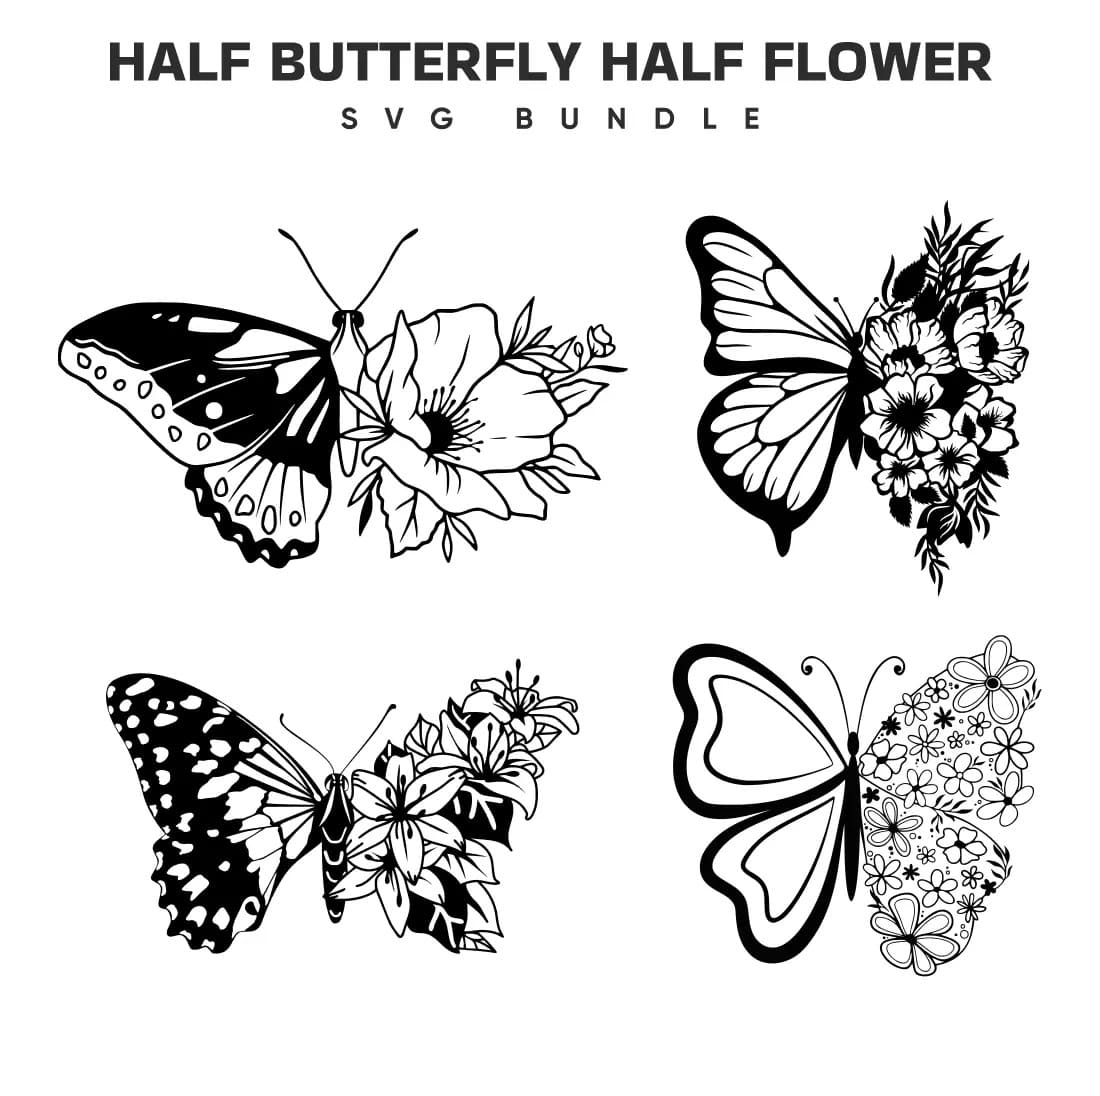 Black and white image of butterflies and flowers.